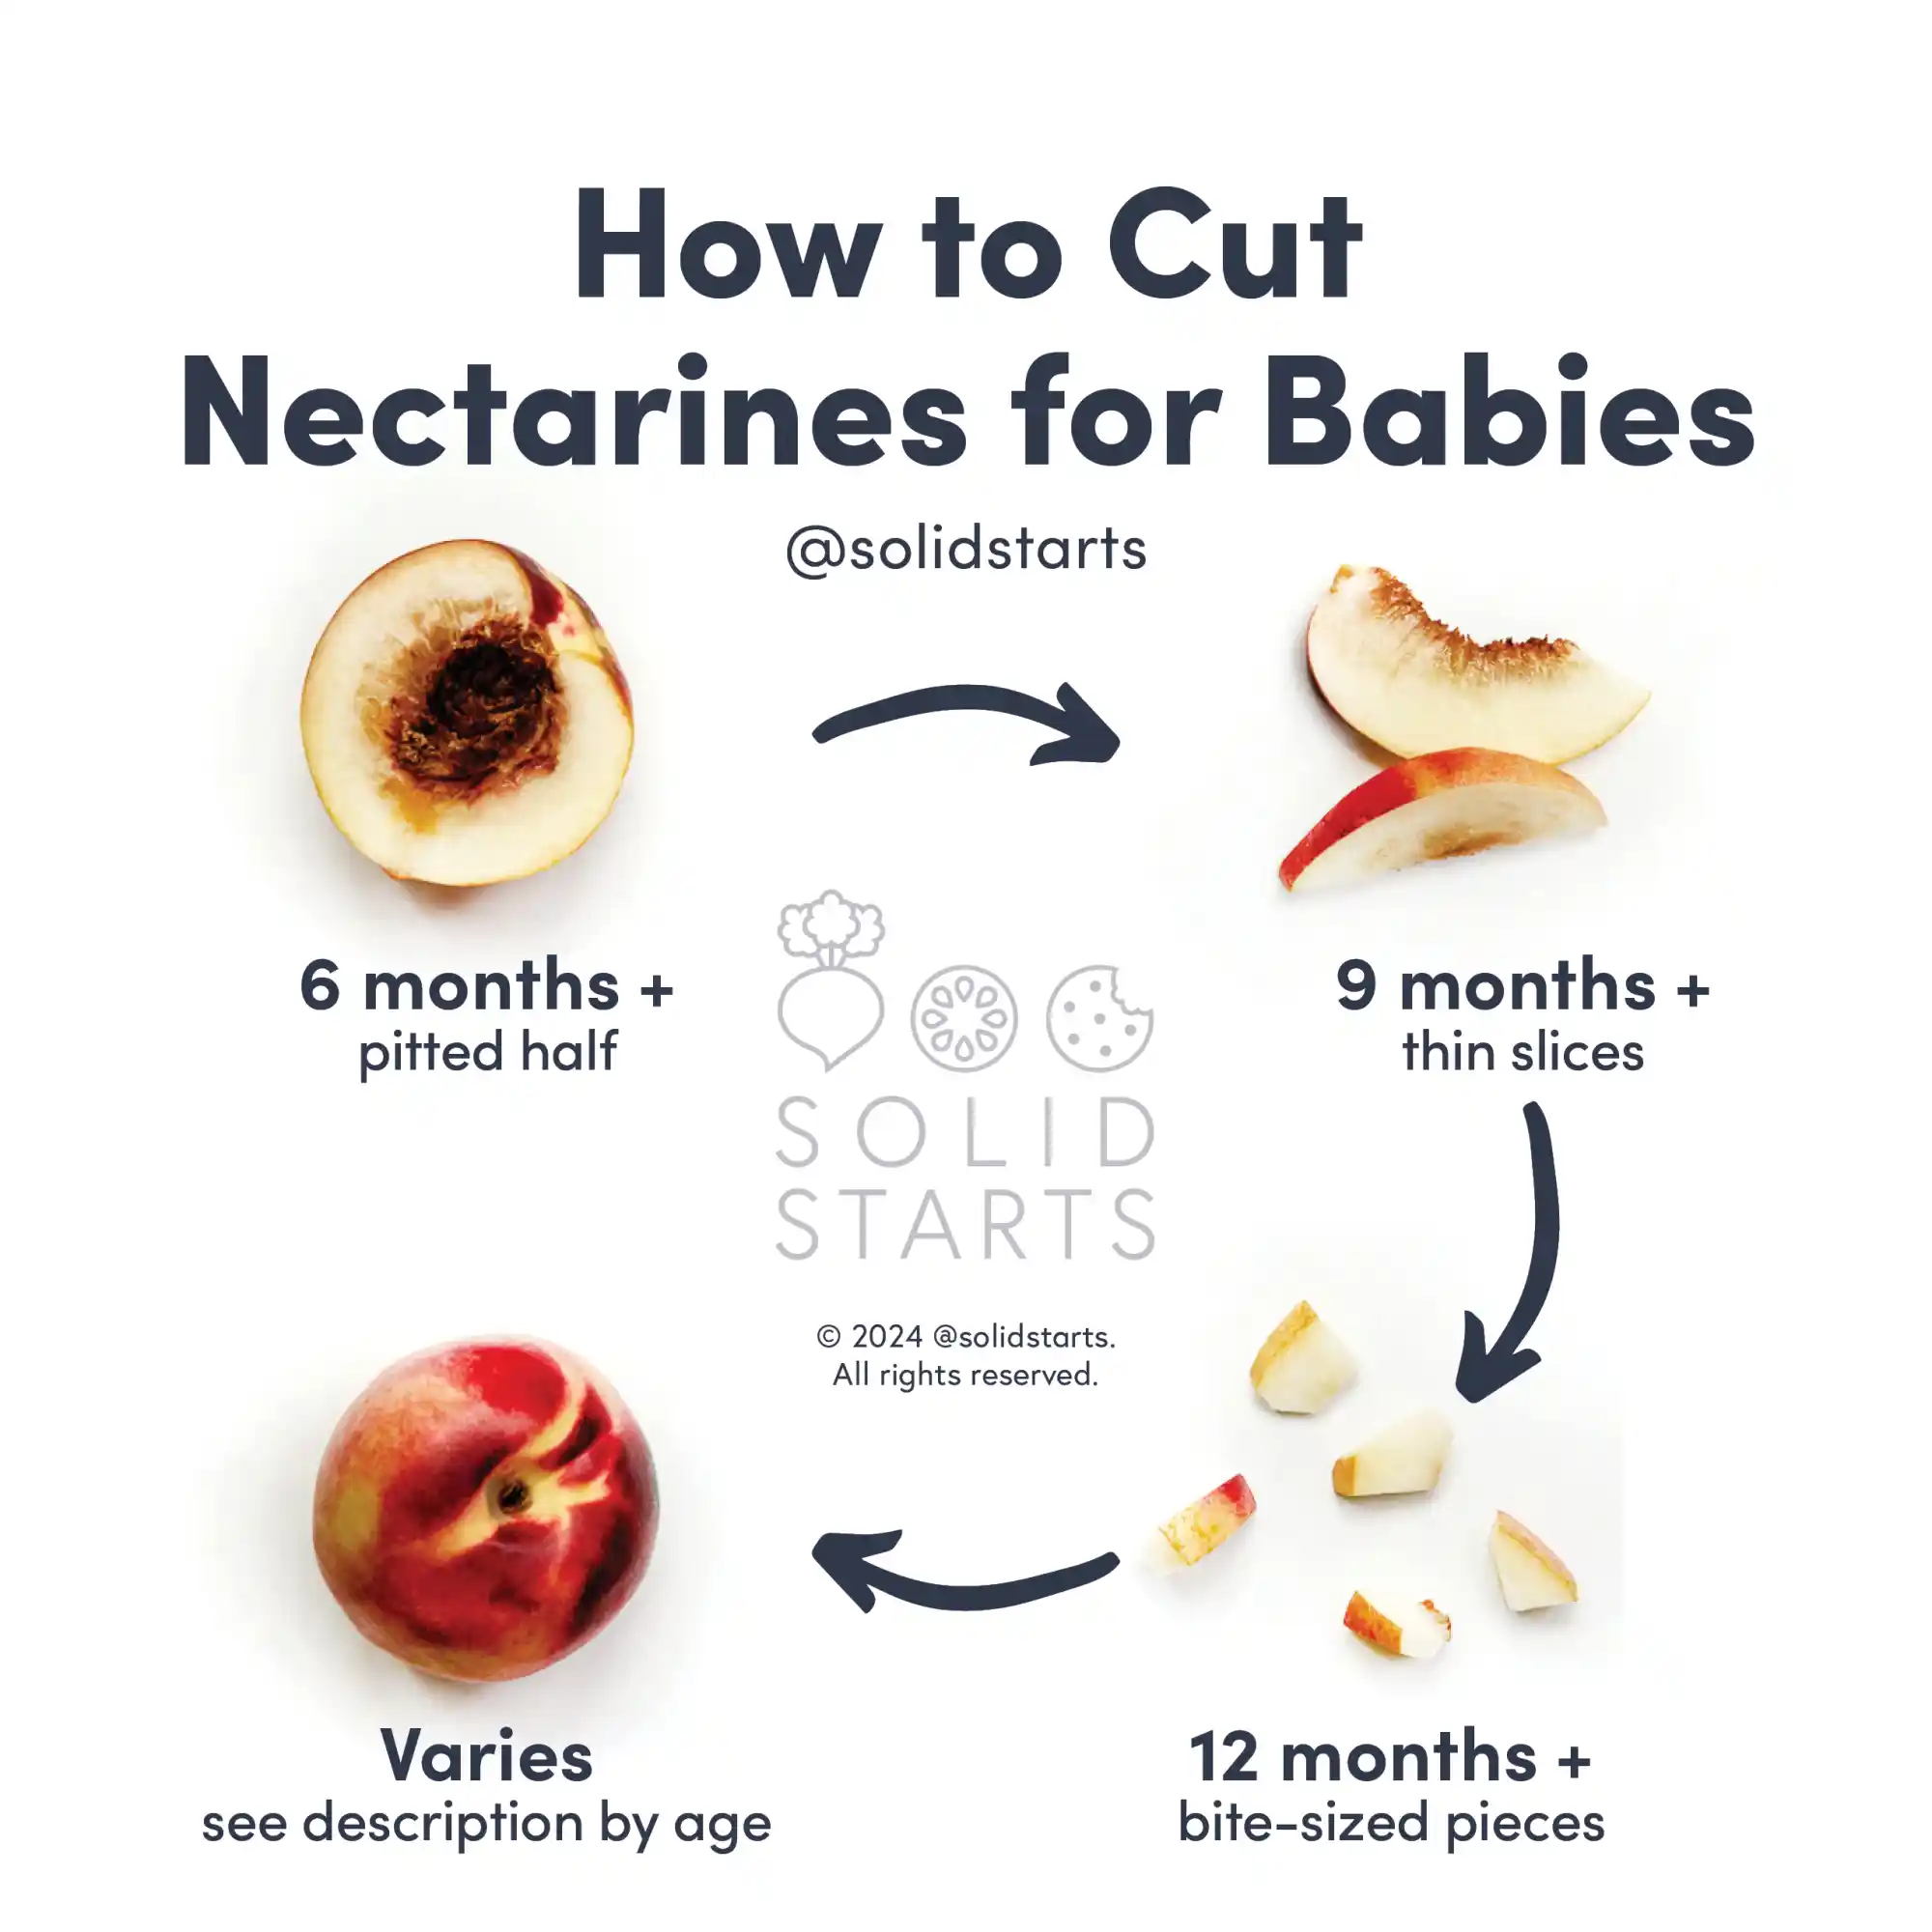 a Solid Starts infographic with the header How to Cut Nectarines for Babies: pitted half for 6 mos, thin slices for 9 mos, bite-sized pieces for 12 mos, and varies for whole fruit